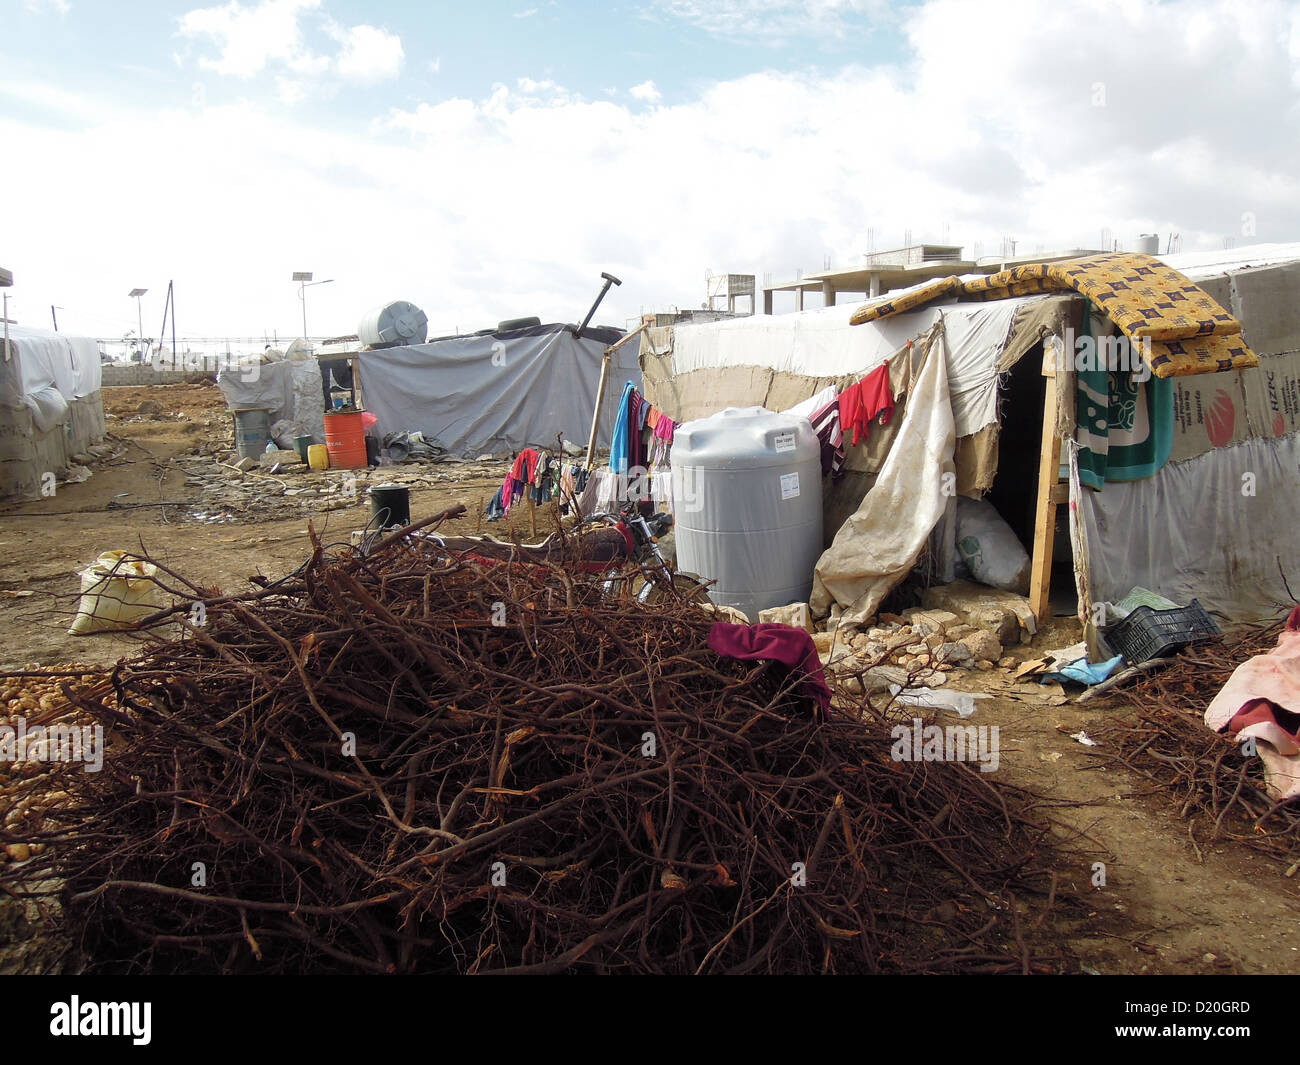 a camp for Syrian refugees near the town zahl in sout lebanon. the baracks are made from tarp over wooden frames. In front wood for heating the baracks. Stock Photo